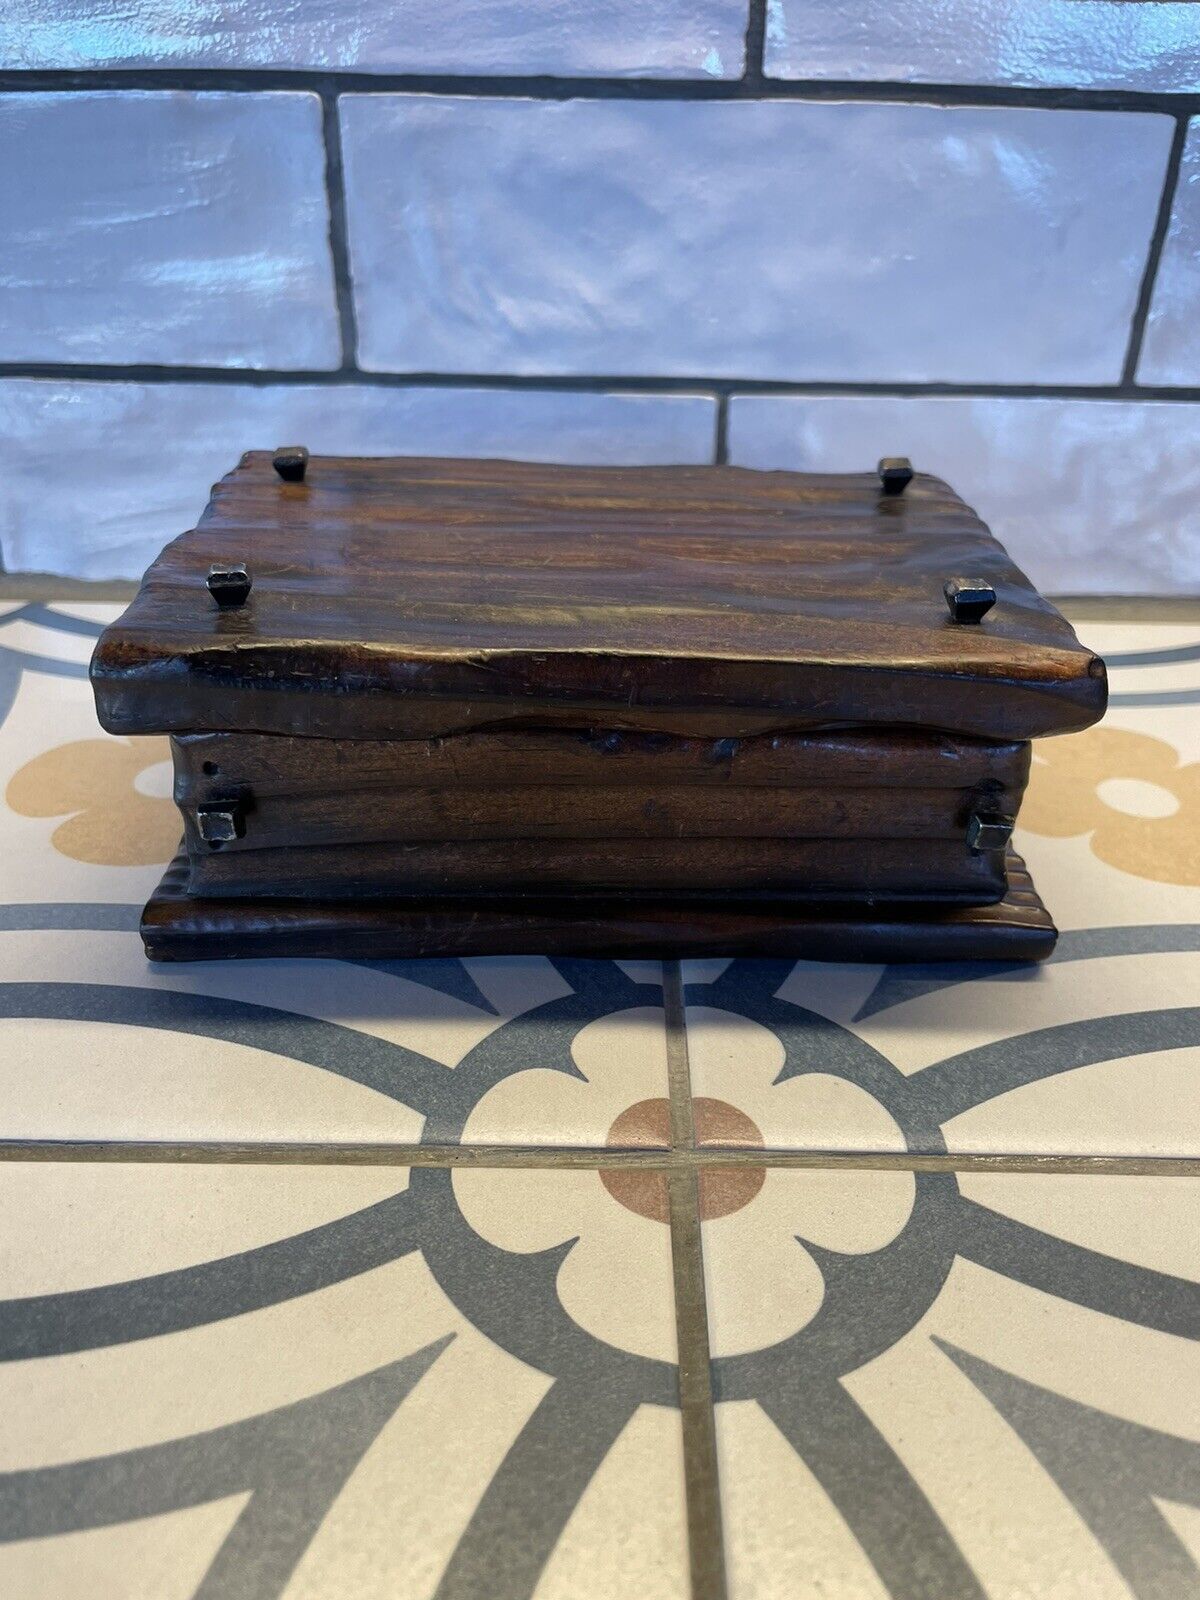 Wooden Sculpted Box With Hinged Lid Vintage Looking Rustic Metal Accents